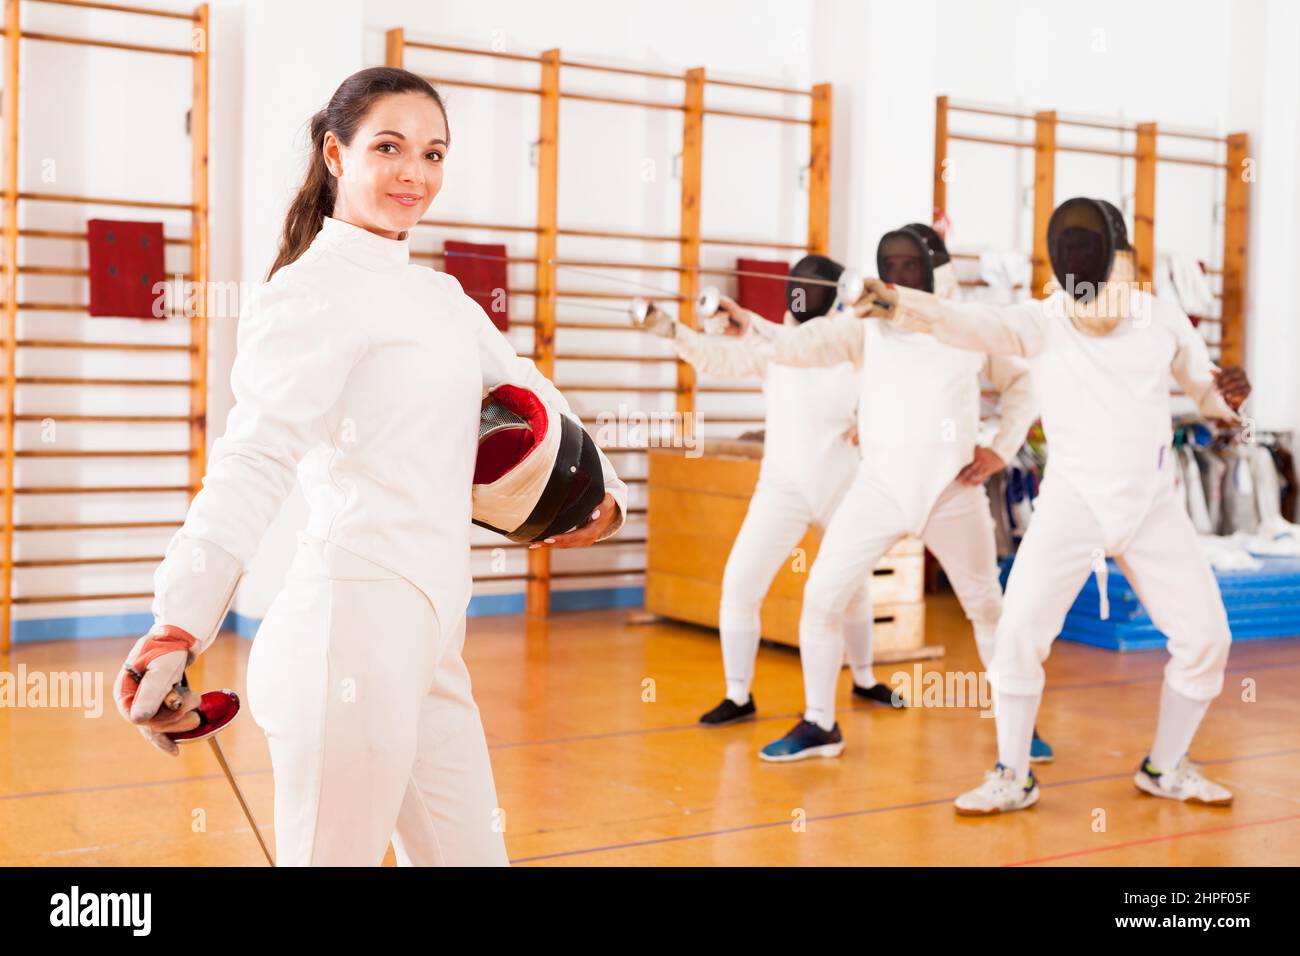 Positive active young female fencer standing at fencing workout Stock Photo